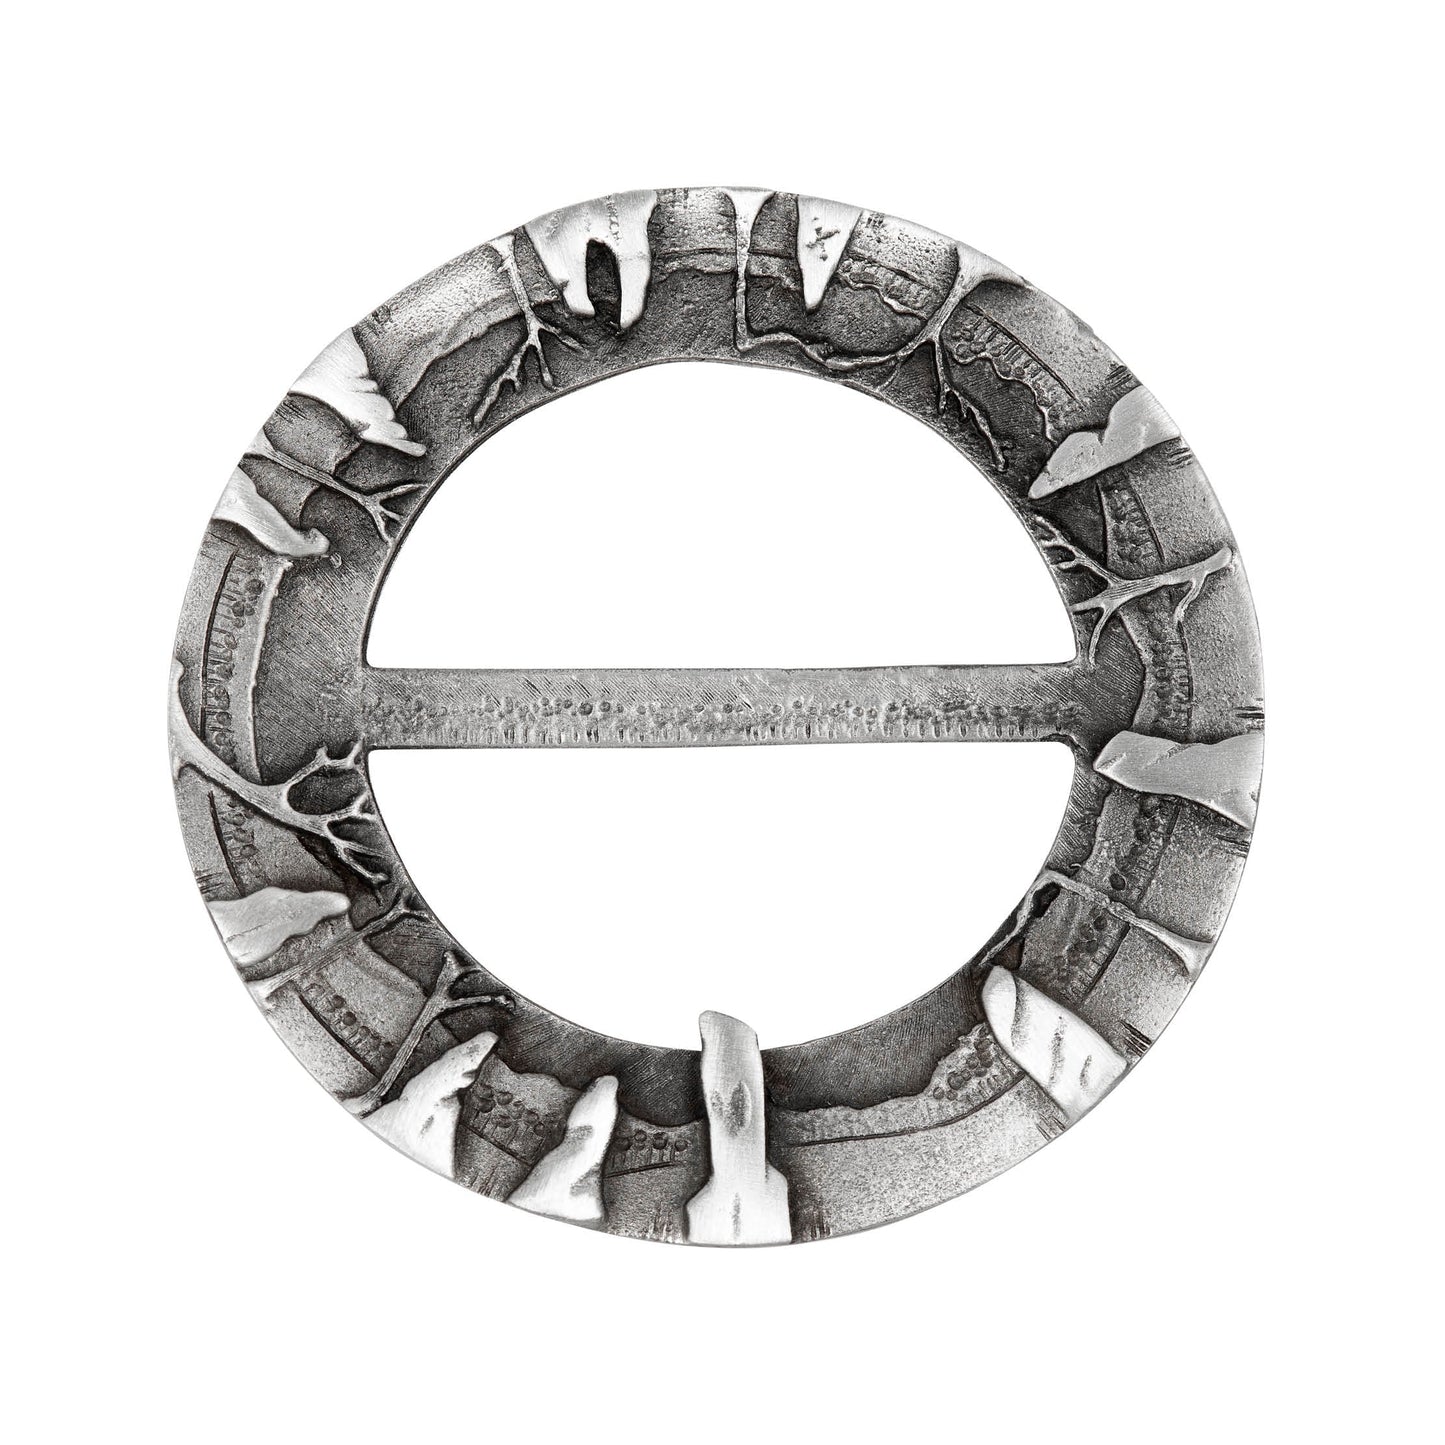 Pewter Scarf Ring Craigh na Dun stone circle featured in the Outlander TV series,  in collaboration with Sony Pictures Consumer Products, by Aurora Jewellery, Orkney, Scotland